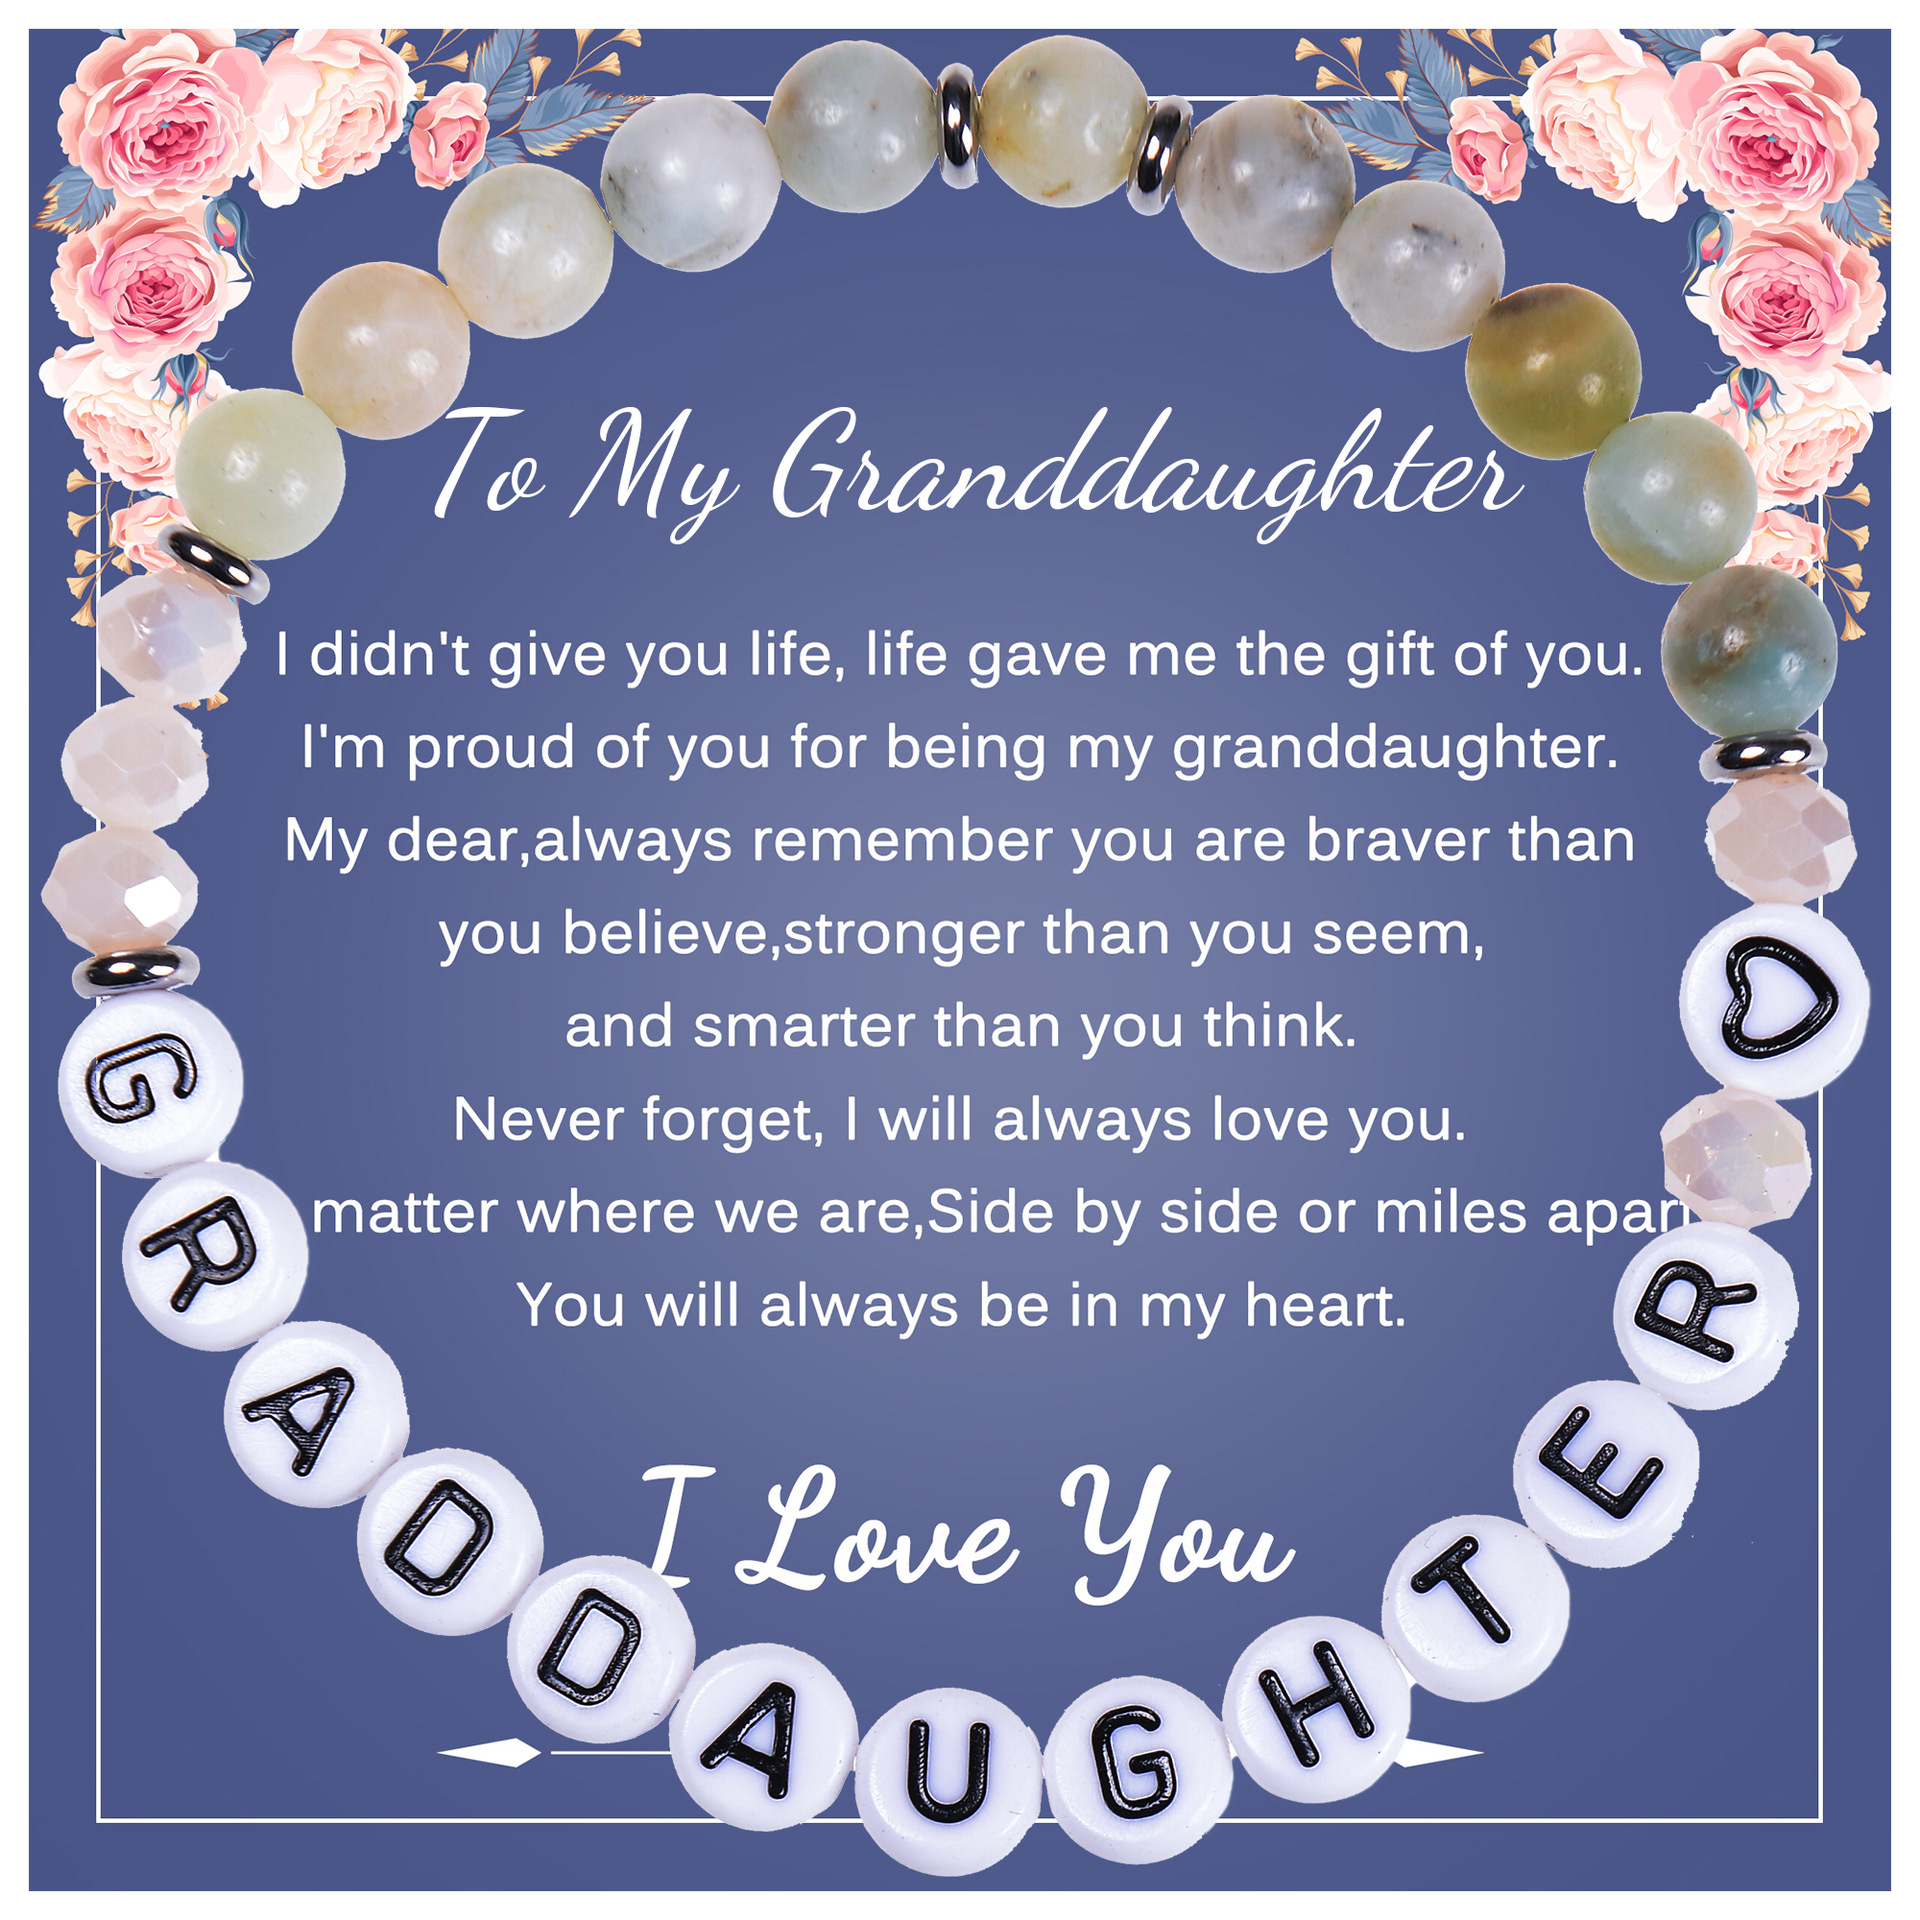 5:To My Granddaughter